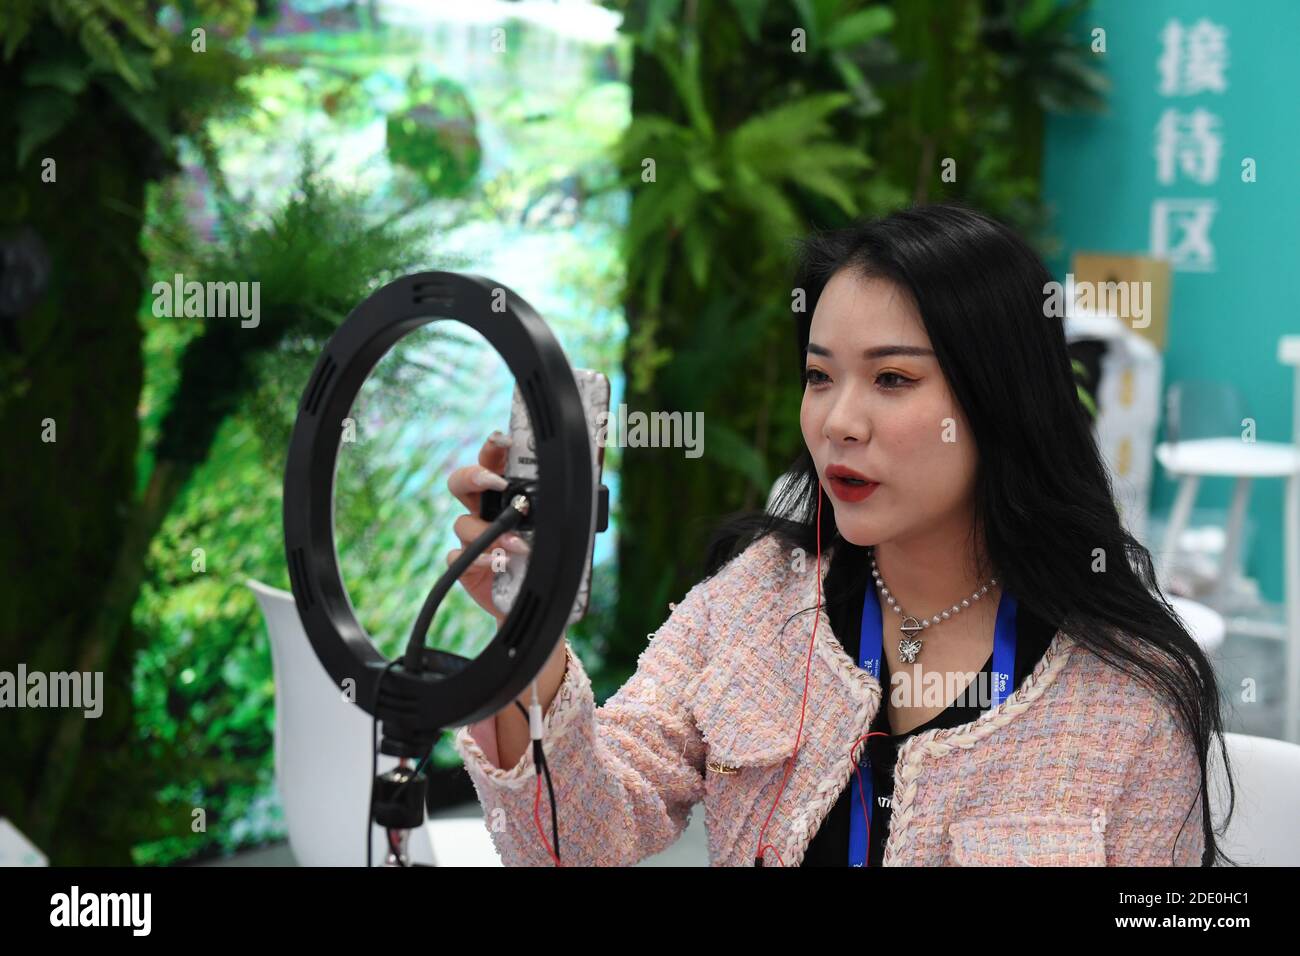 Nanning, China's Guangxi Zhuang Autonomous Region. 27th Nov, 2020. An exhibitor promotes goods via livestreaming at the 17th China-ASEAN Expo in Nanning, south China's Guangxi Zhuang Autonomous Region, Nov. 27, 2020. Credit: Lu Boan/Xinhua/Alamy Live News Stock Photo